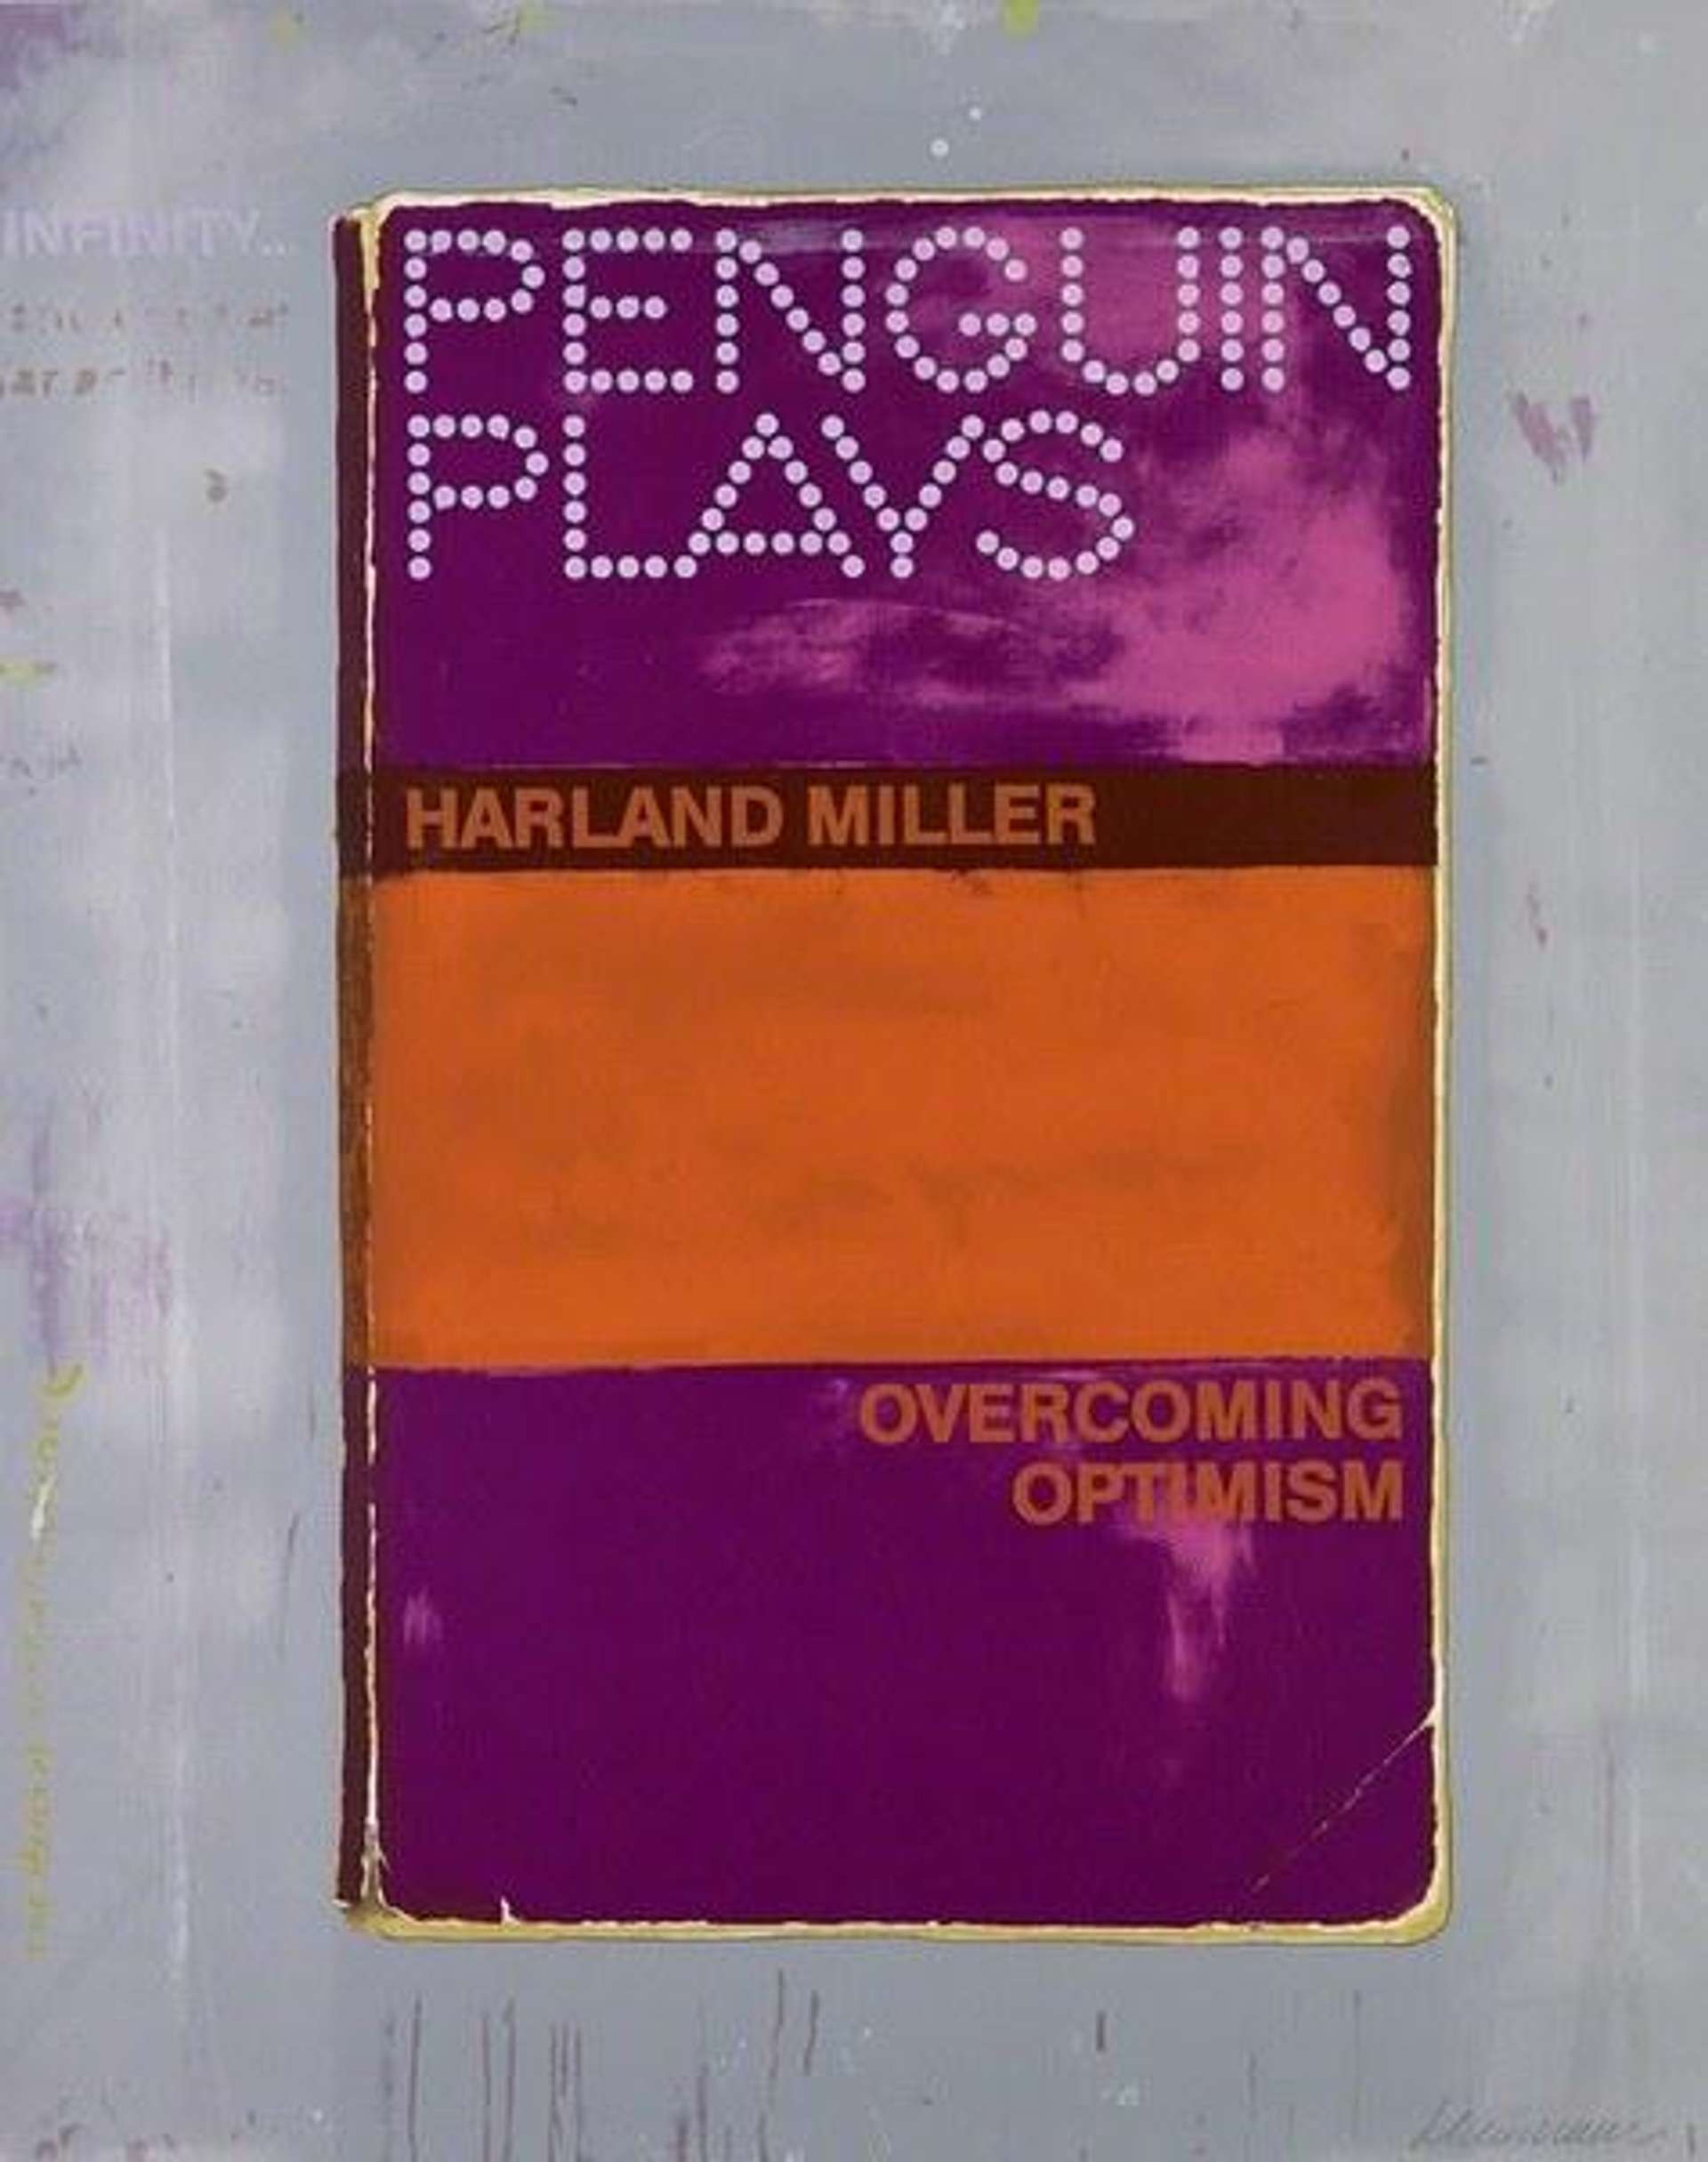 Harland Miller: Overcoming Optimism - Signed Print